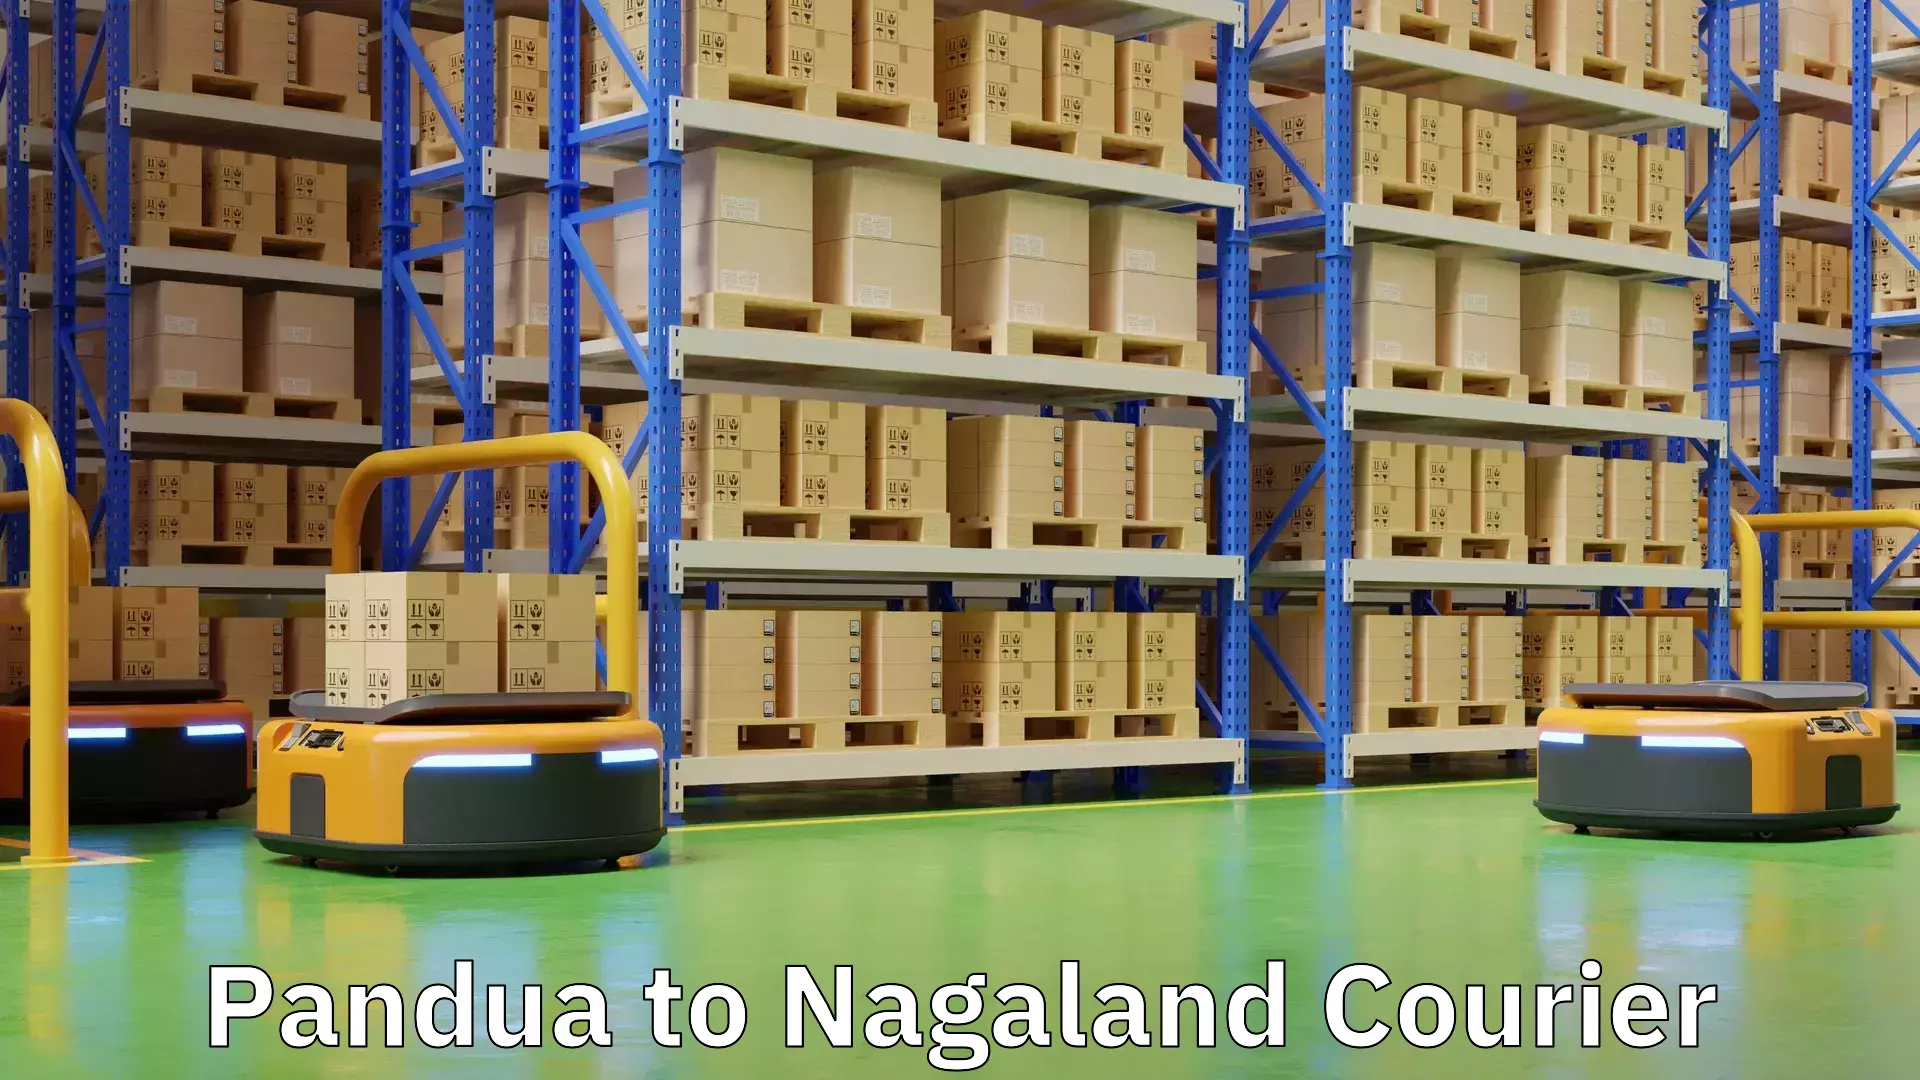 Multi-national courier services Pandua to Nagaland